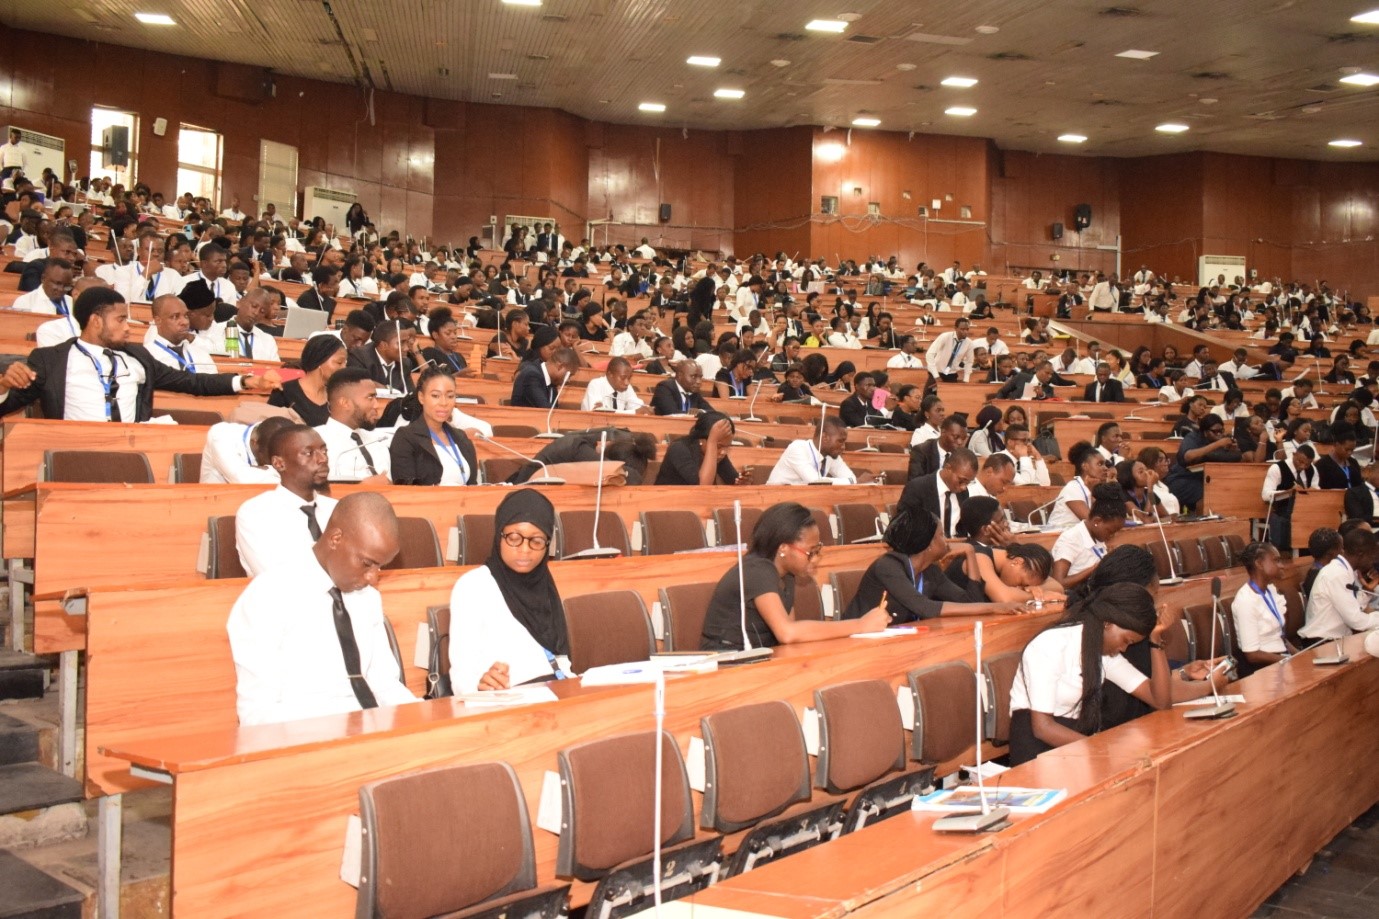 Cross-section of students and attendees